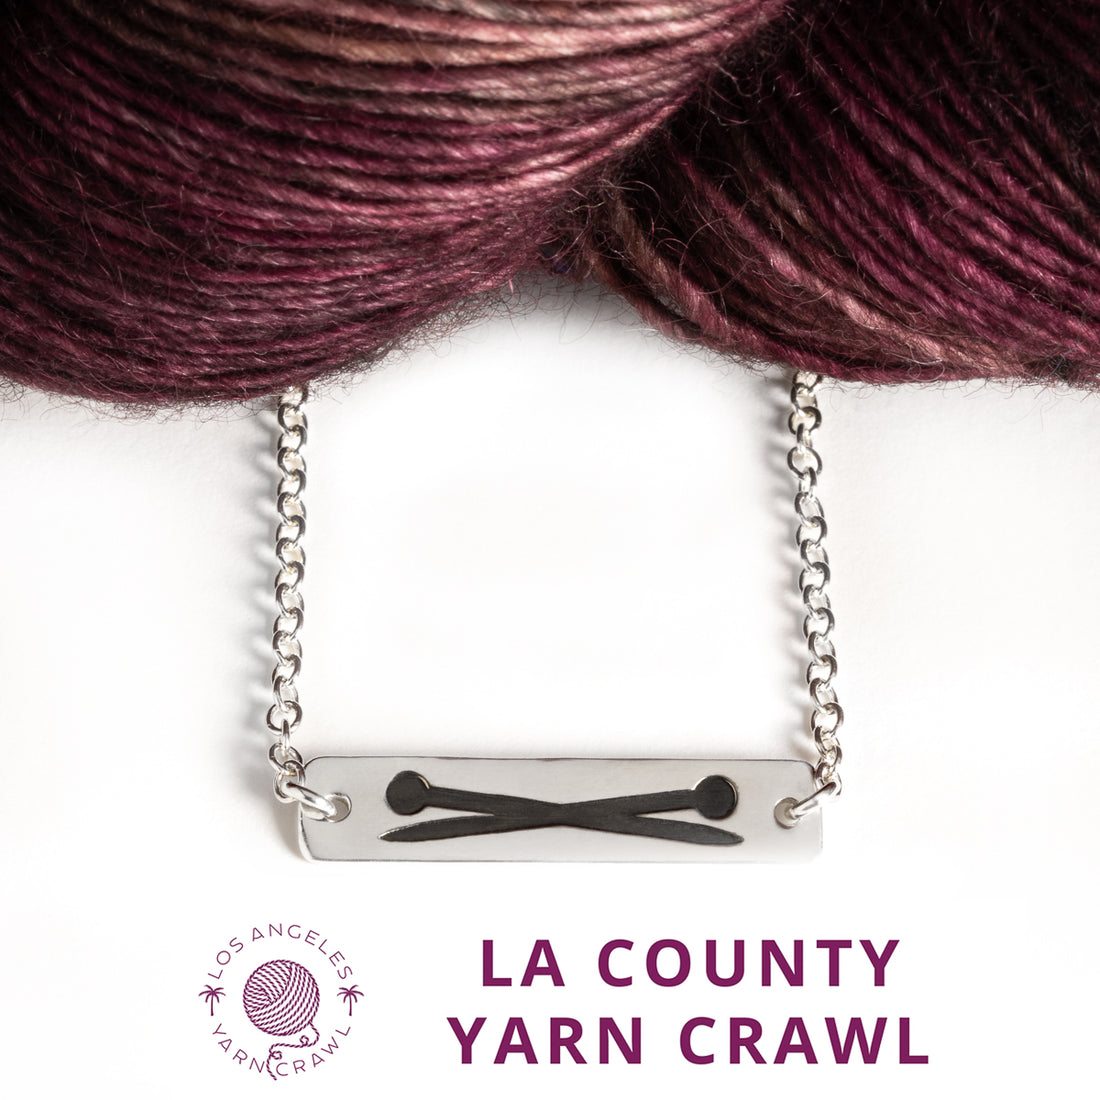 Join Us During the Los Angeles Yarn Crawl April 4-13th